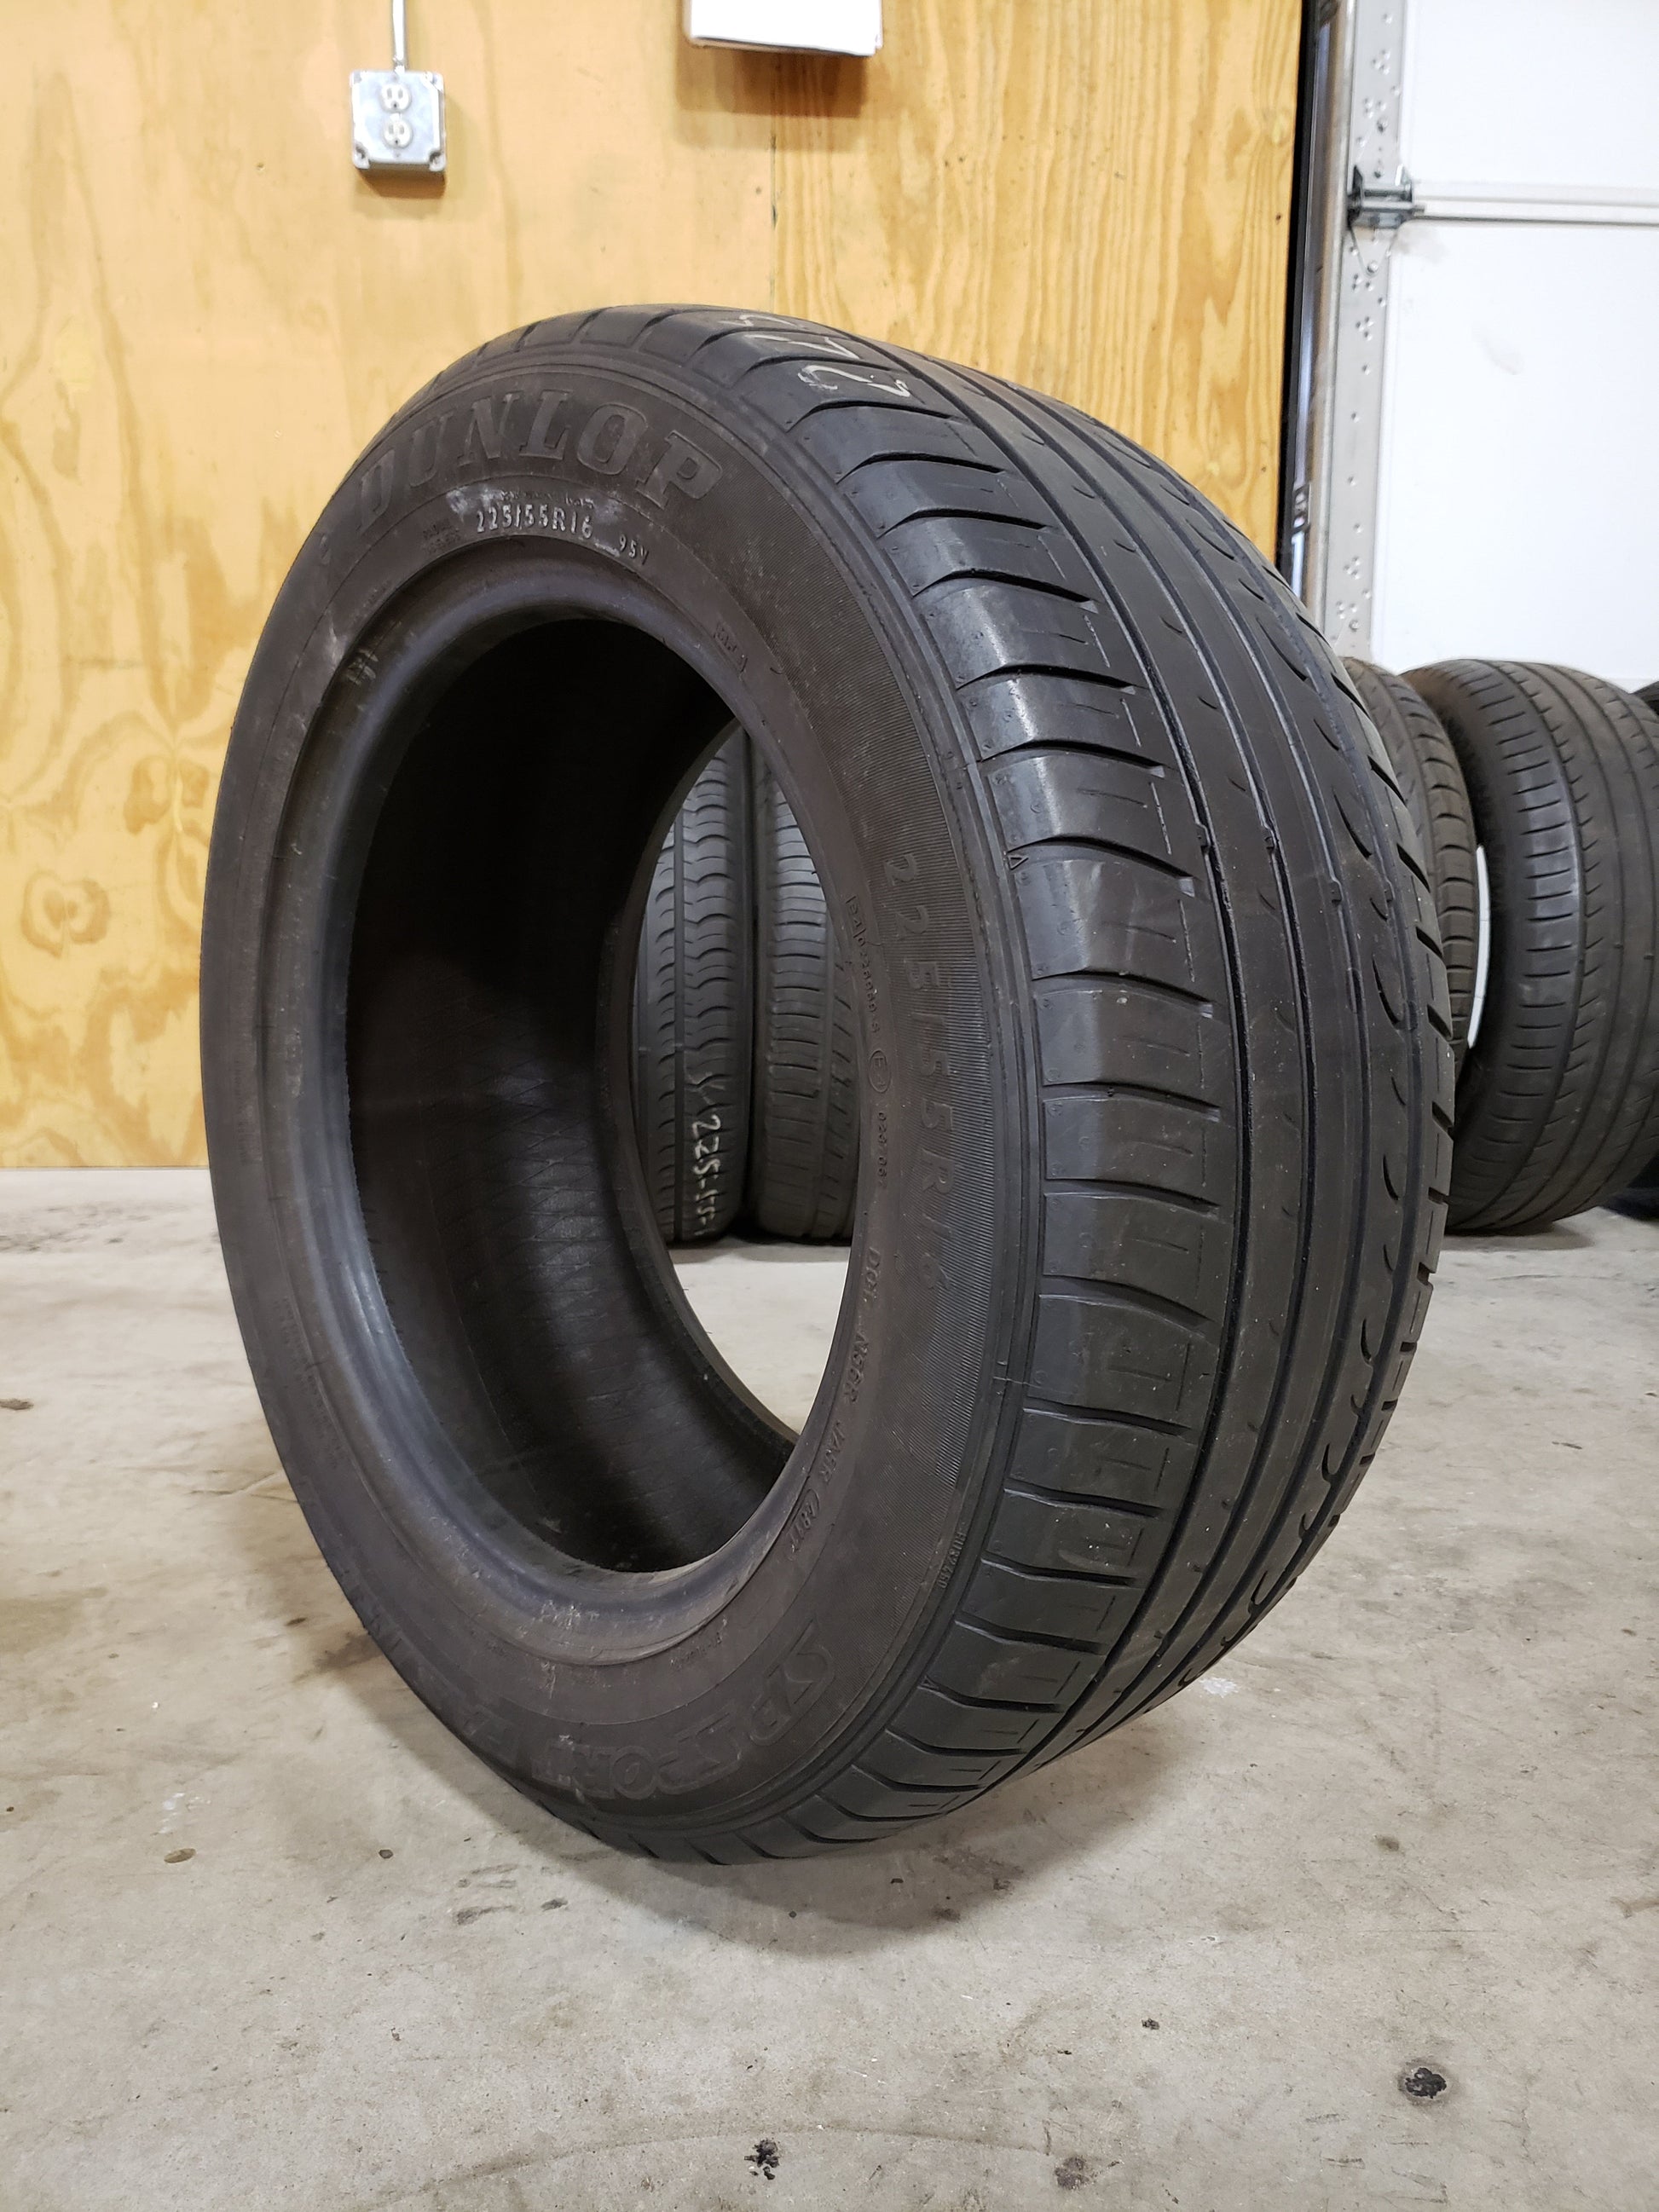 Fast 95V SP High - Tires – XL Dunlop 225/55R16 Used Response Sport Tread | Tires Used SINGLE